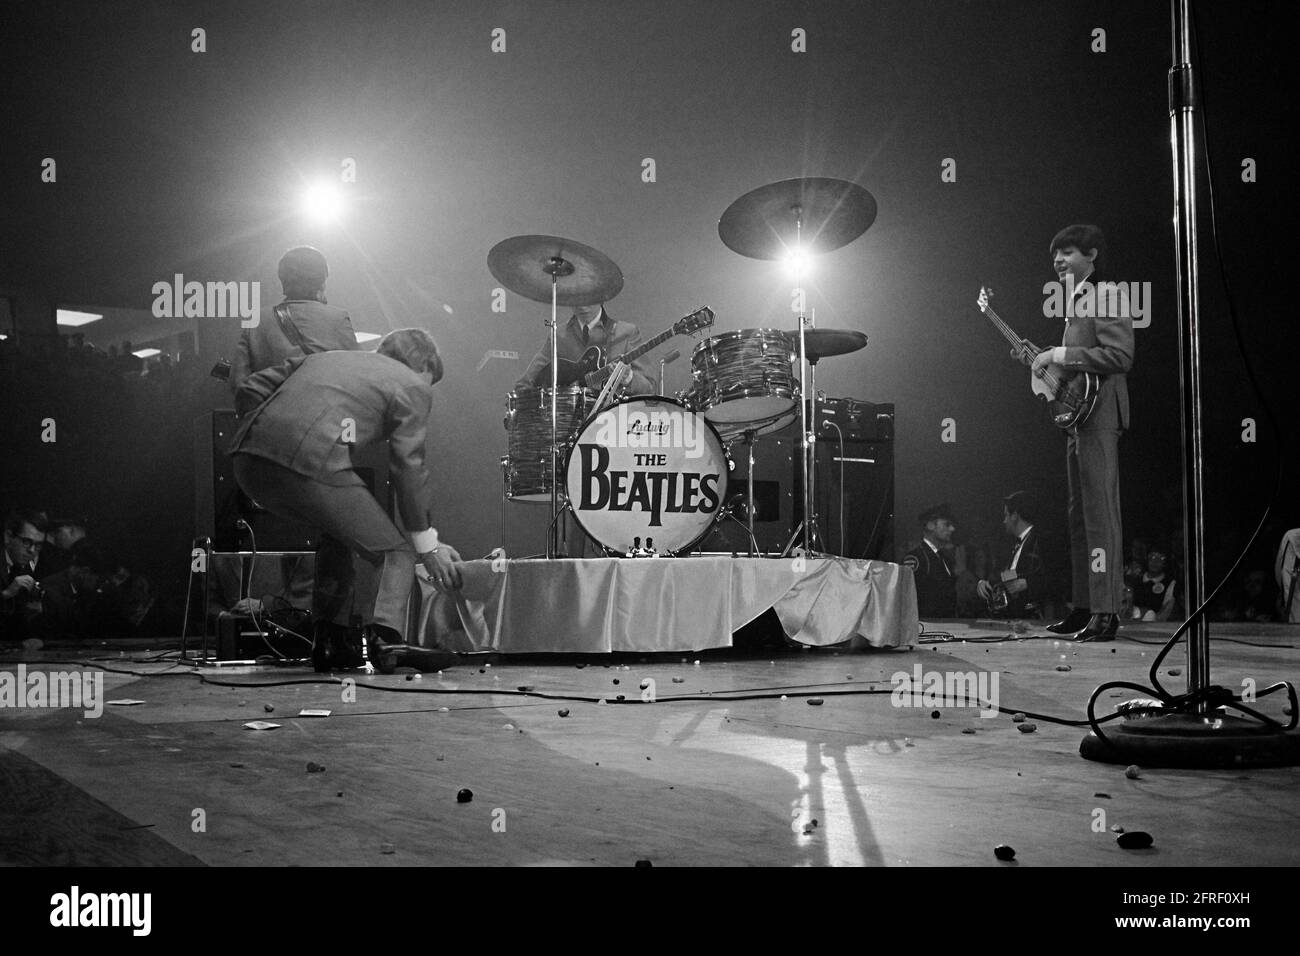 The Beatles performing at the Washington Coliseum in their first American concert on February 11, 1964. The stage is littered with jelly beans from fans pelting the band with them after a New York newspaper reported the band discussing a like for them. (USA) Stock Photo